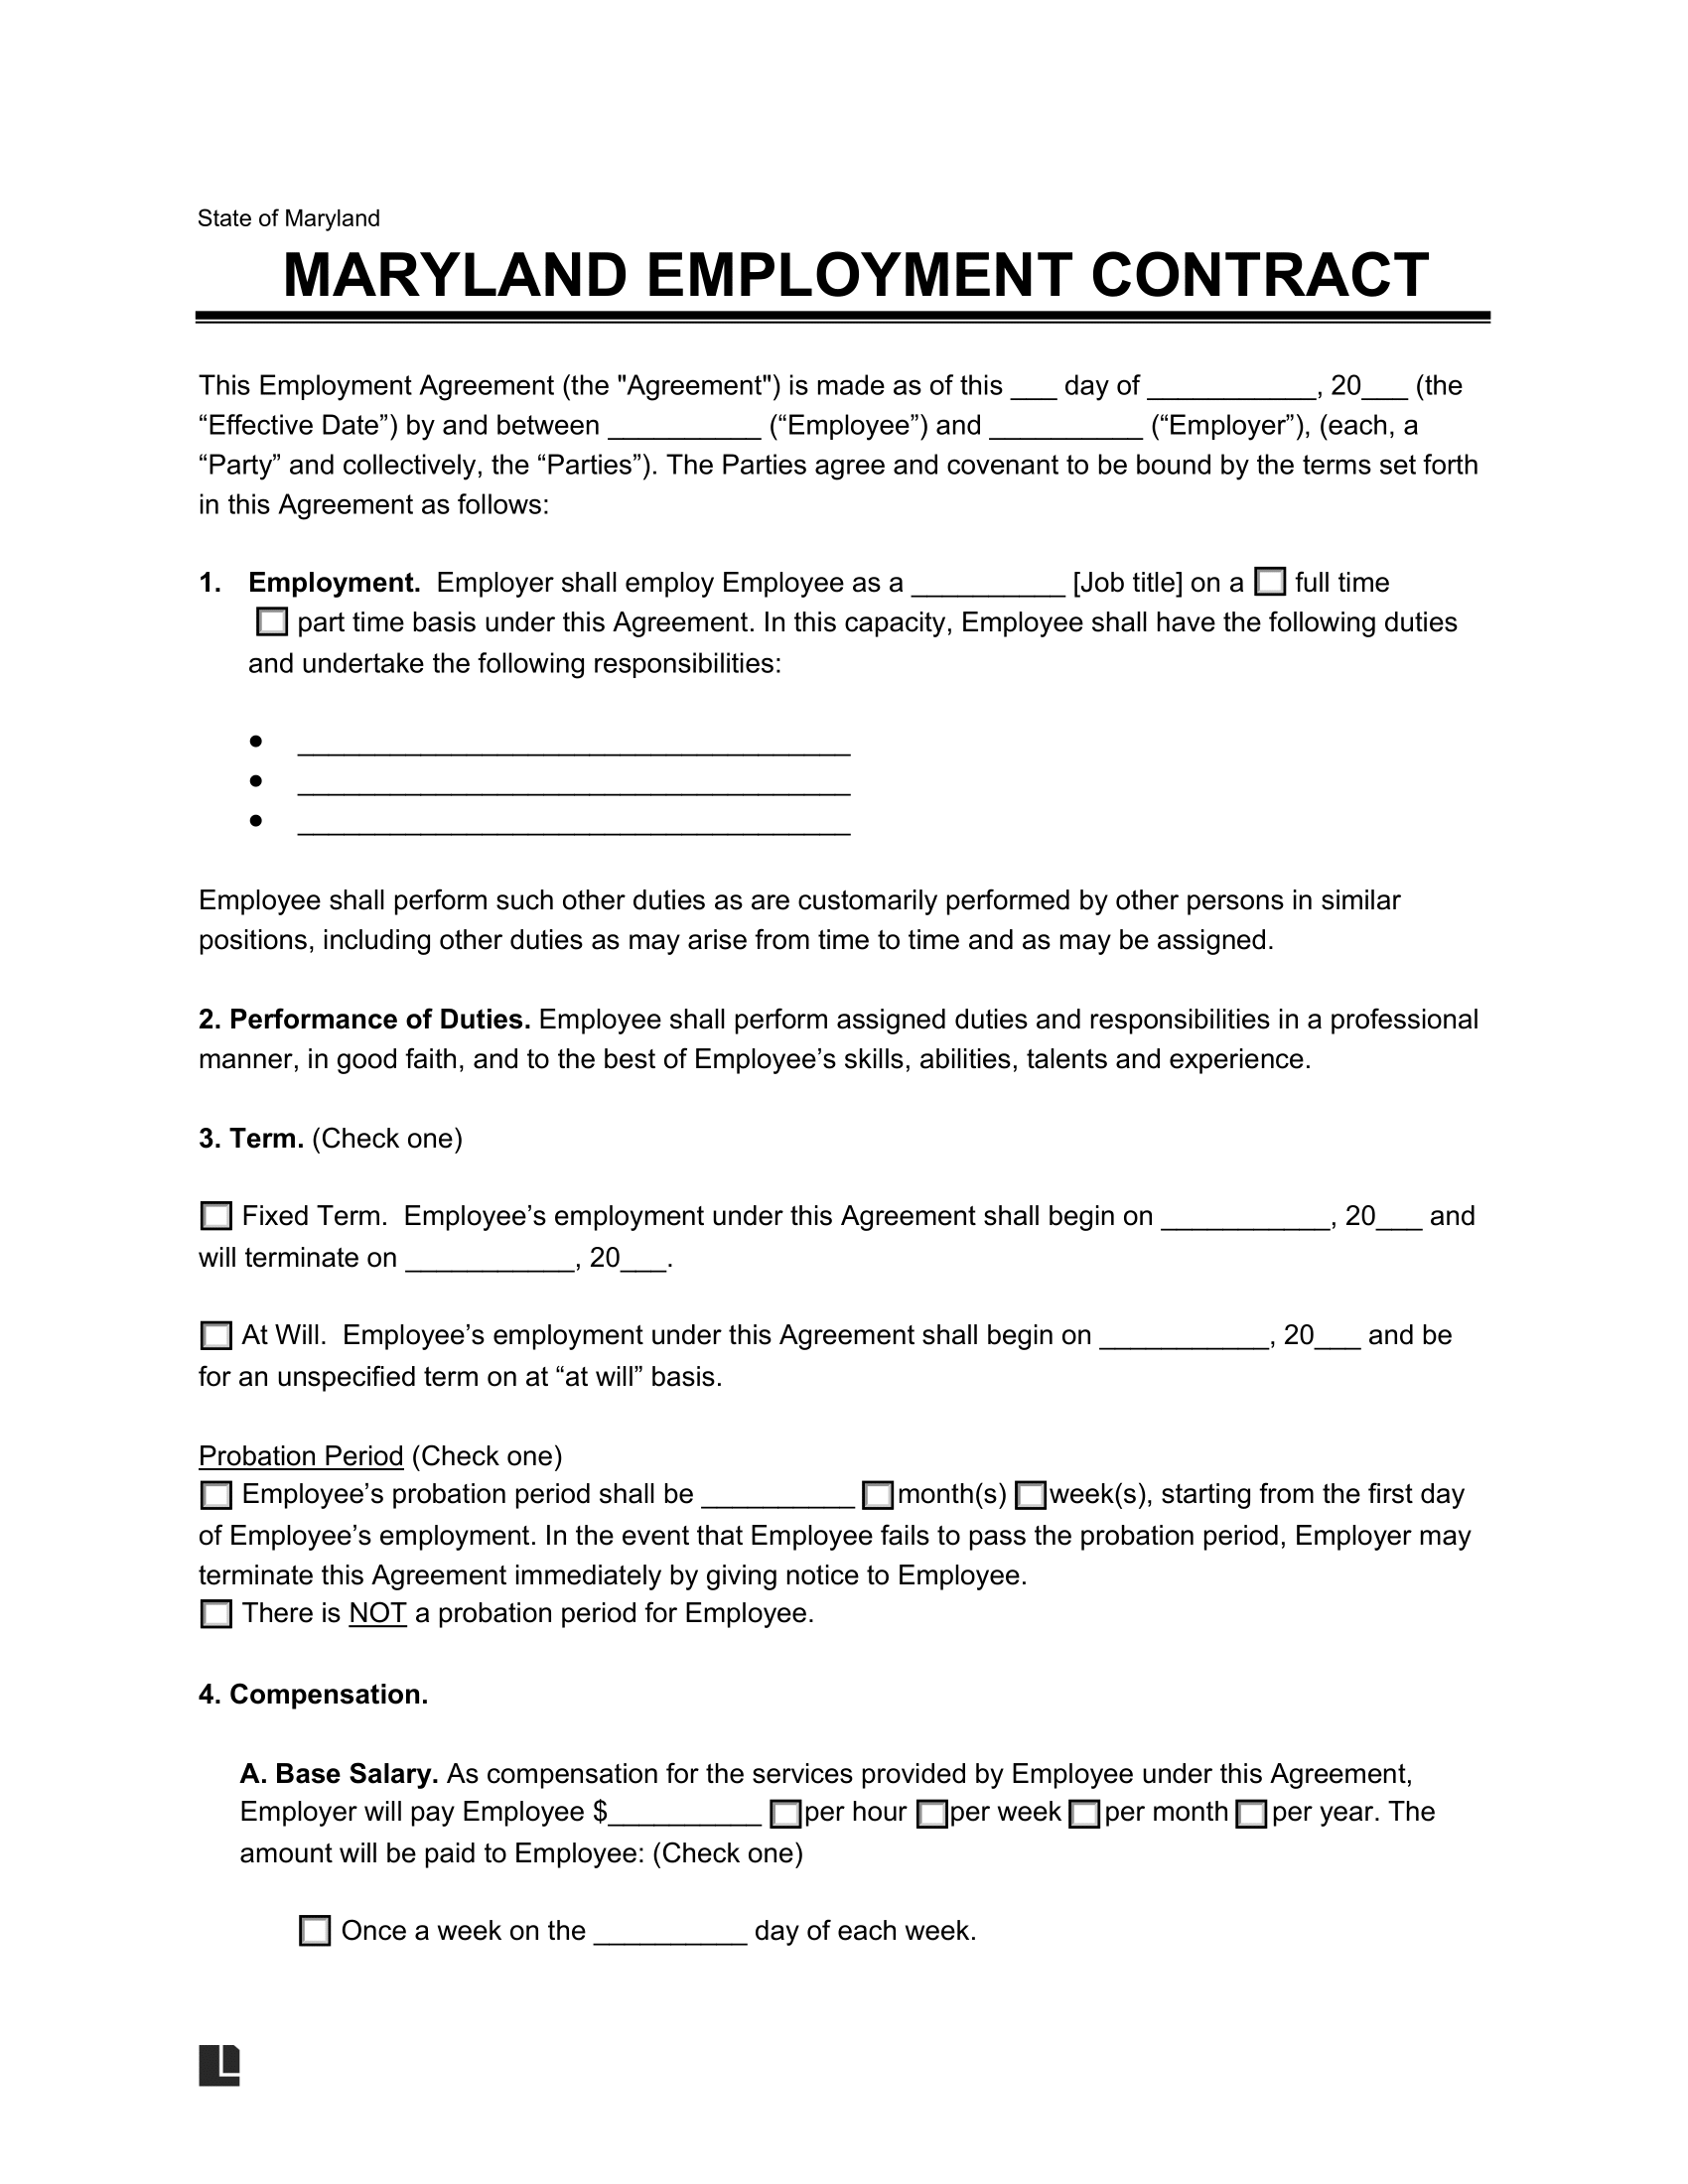 Maryland Employment Contract Template